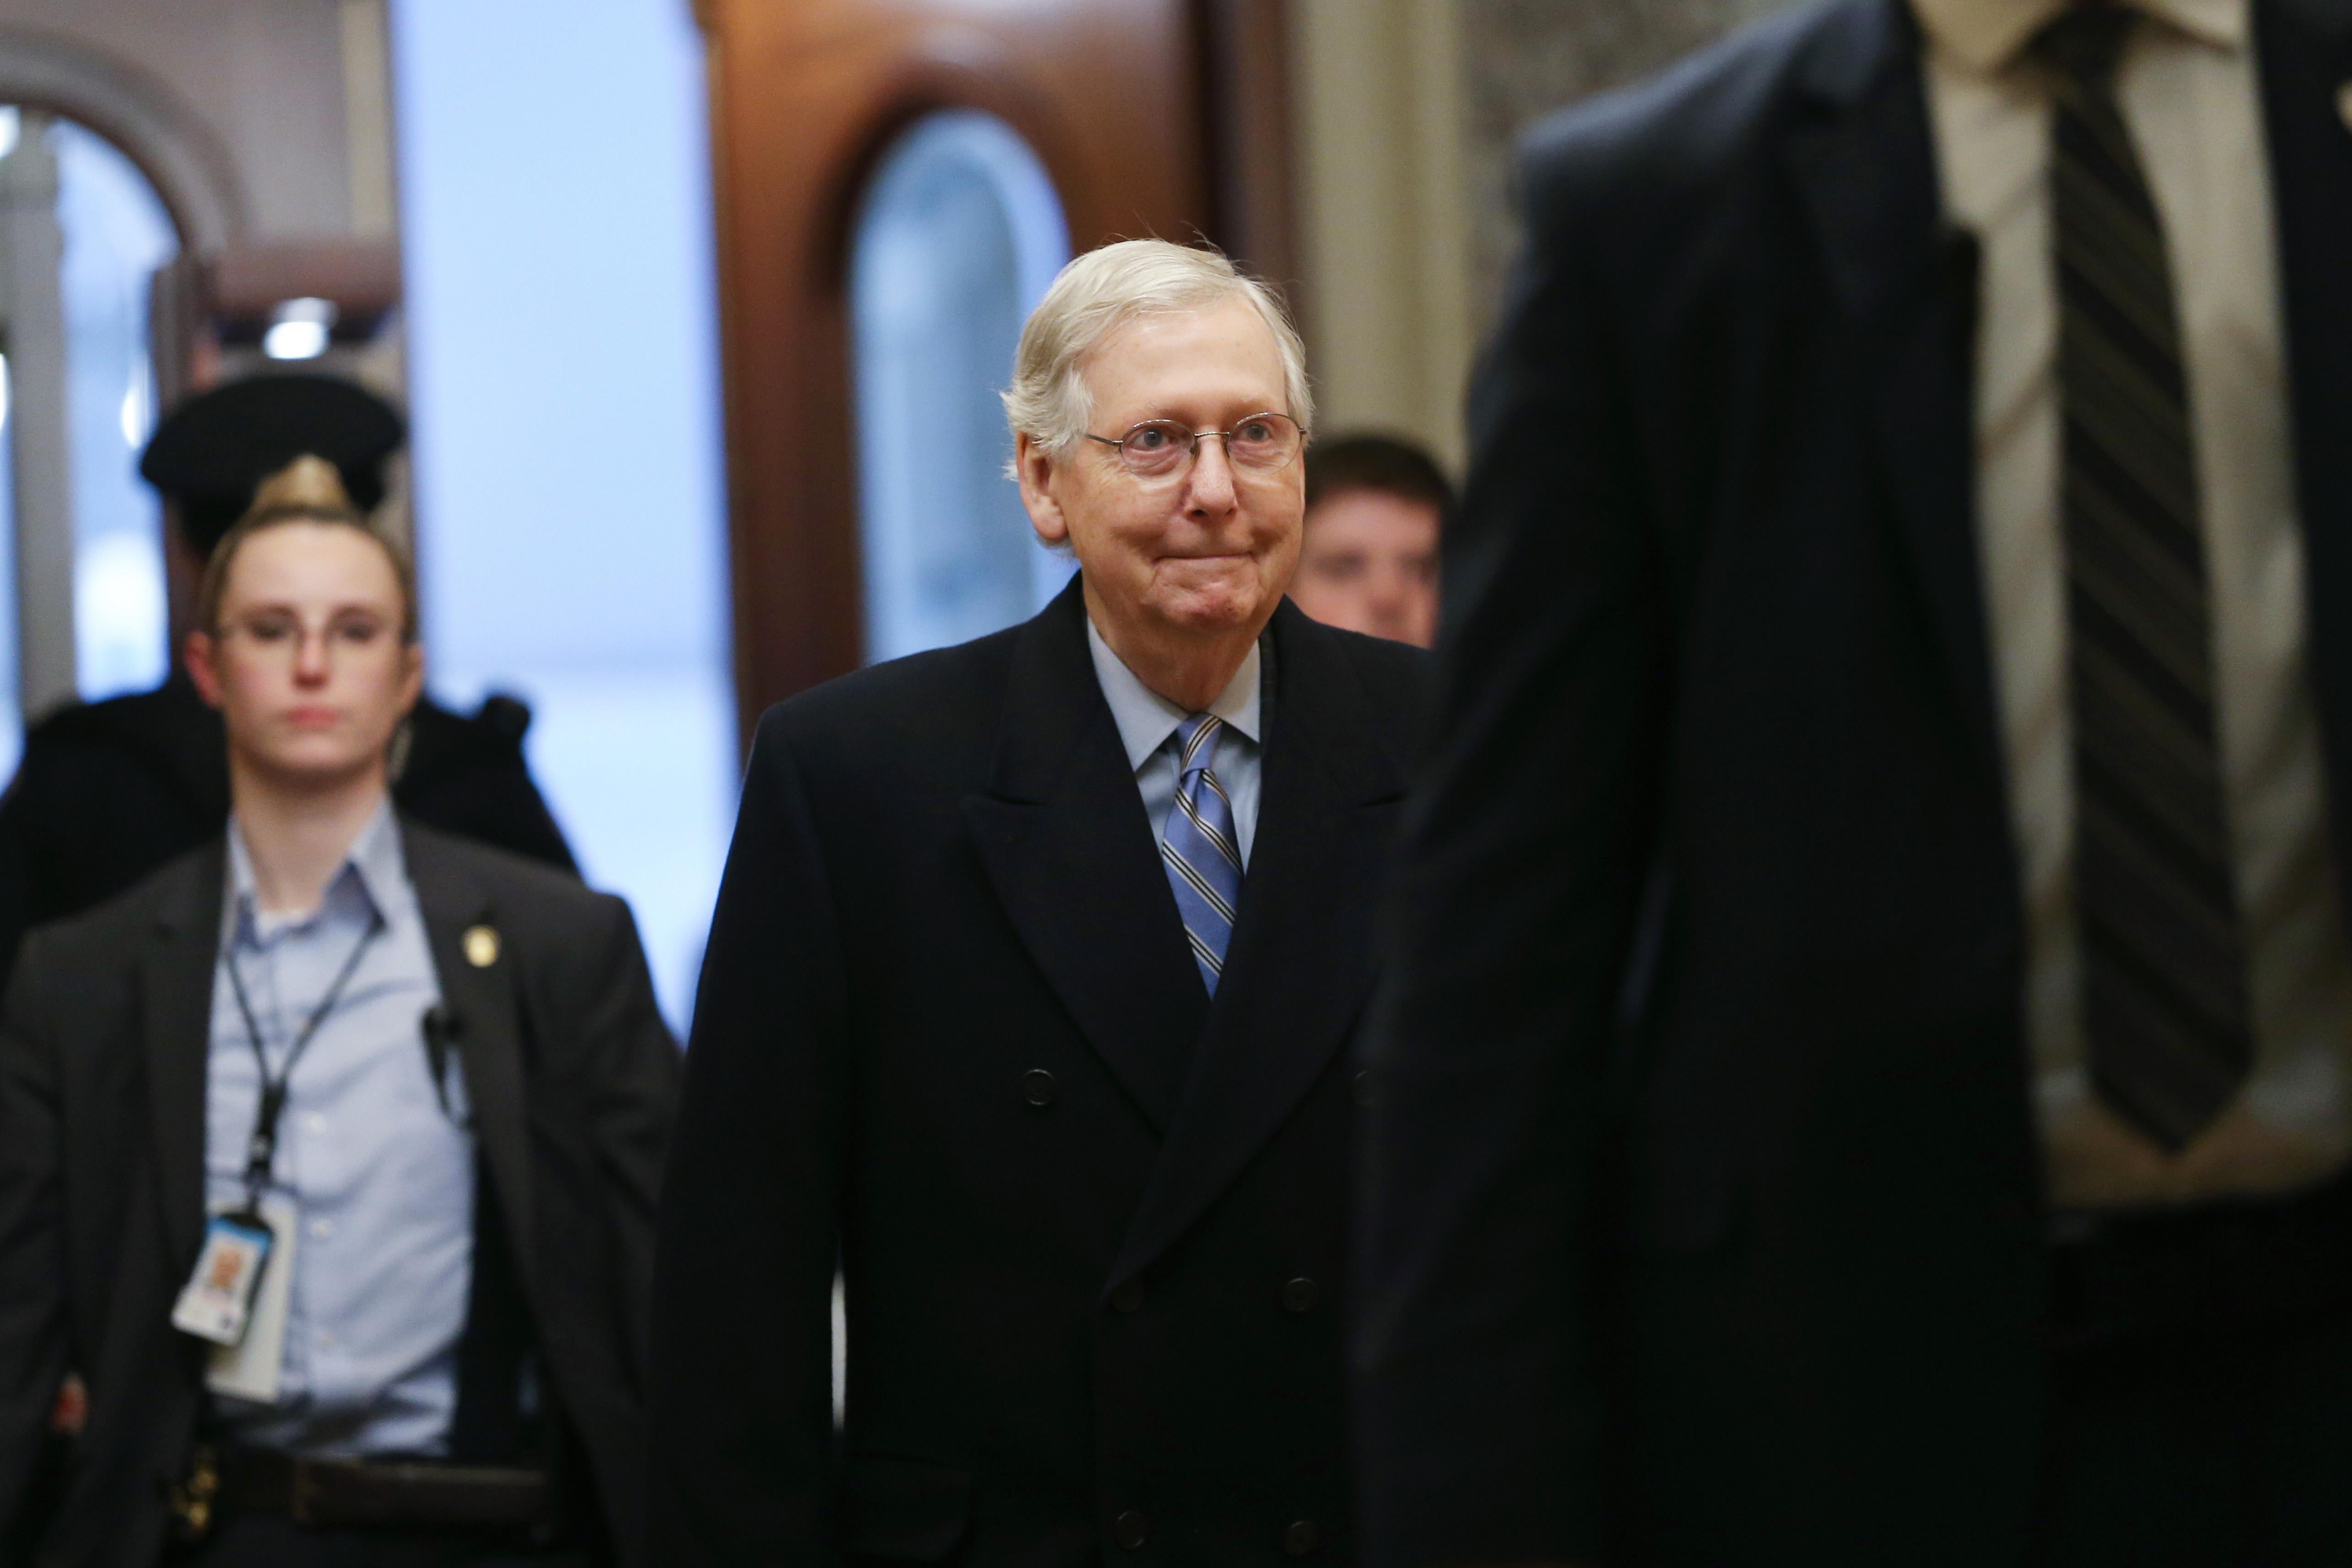 Mitch McConnell walks with aides behind him.